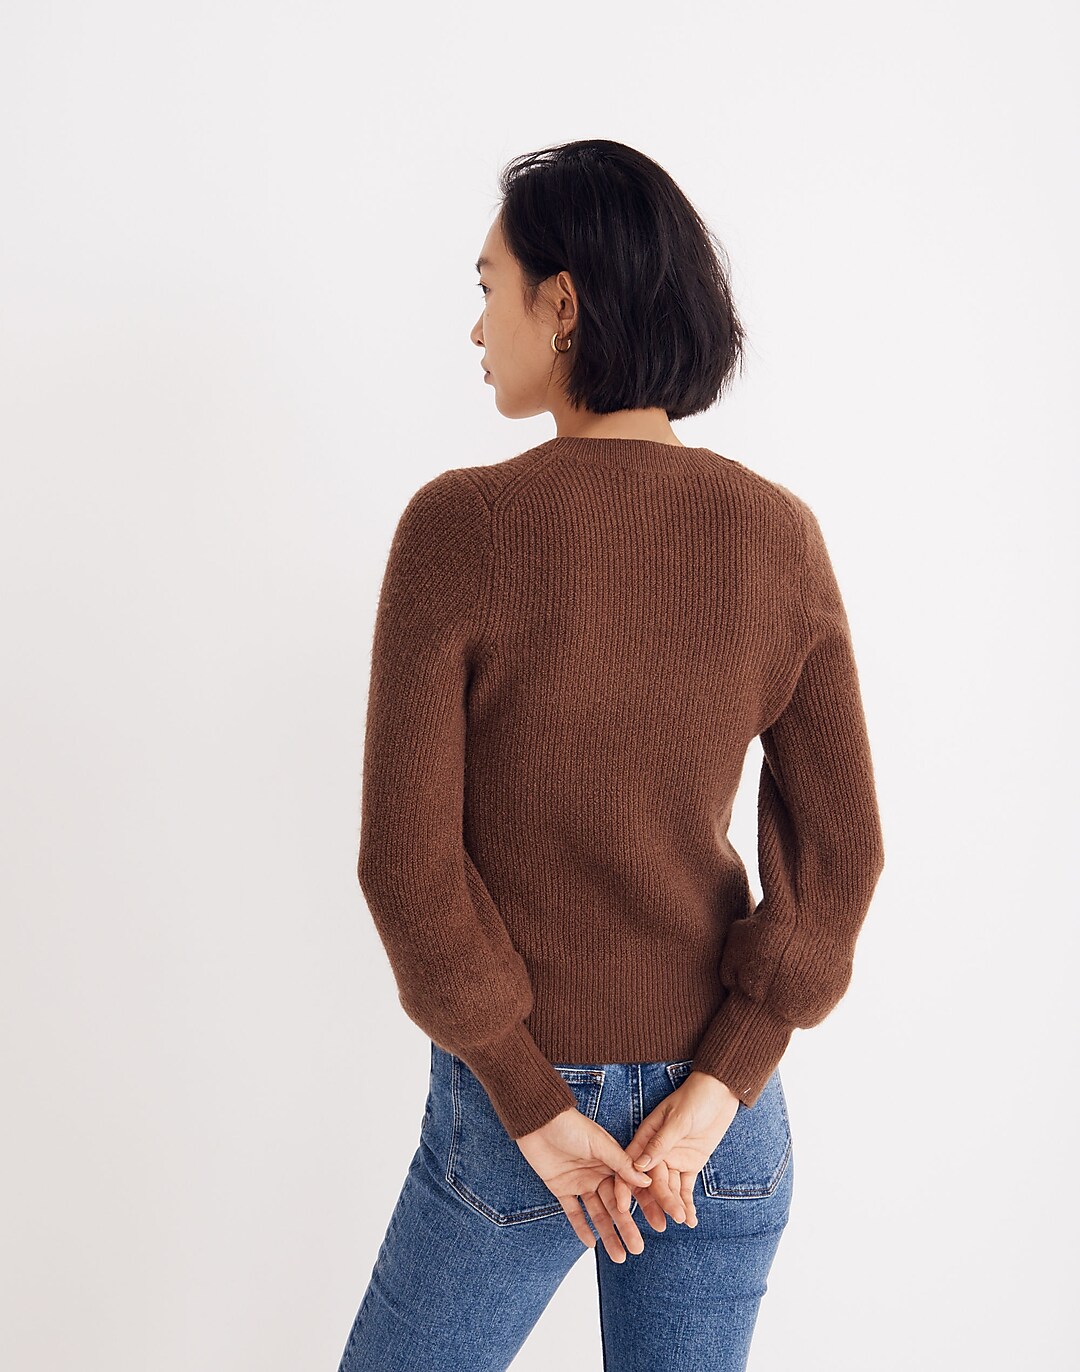 Melwood Square-Neck Pullover Sweater in Coziest Yarn